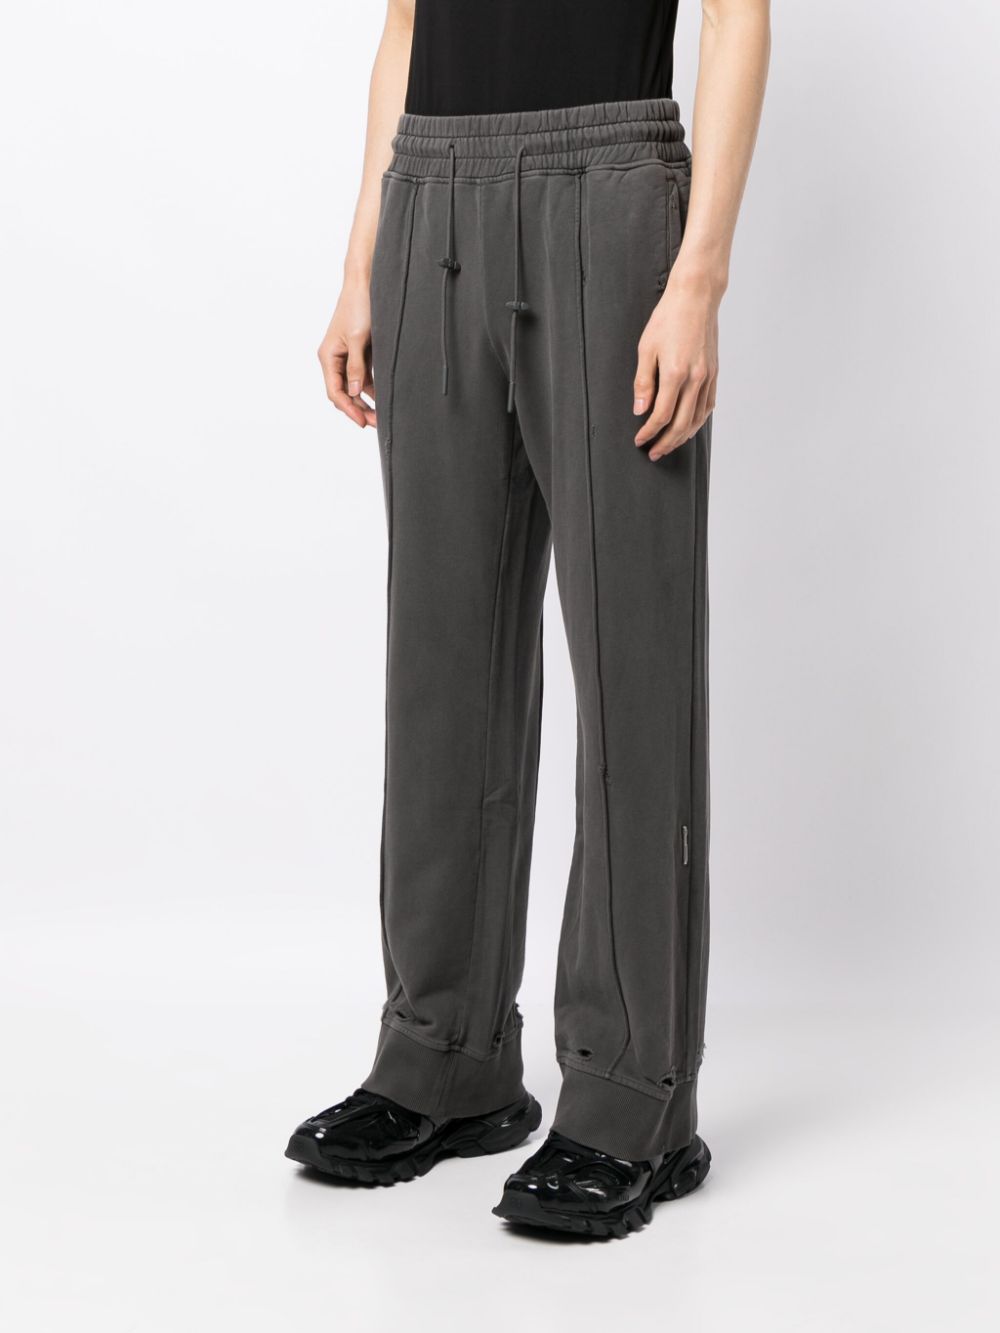 BLUFCAMP Pure Straight Basic Trousers - スラックス